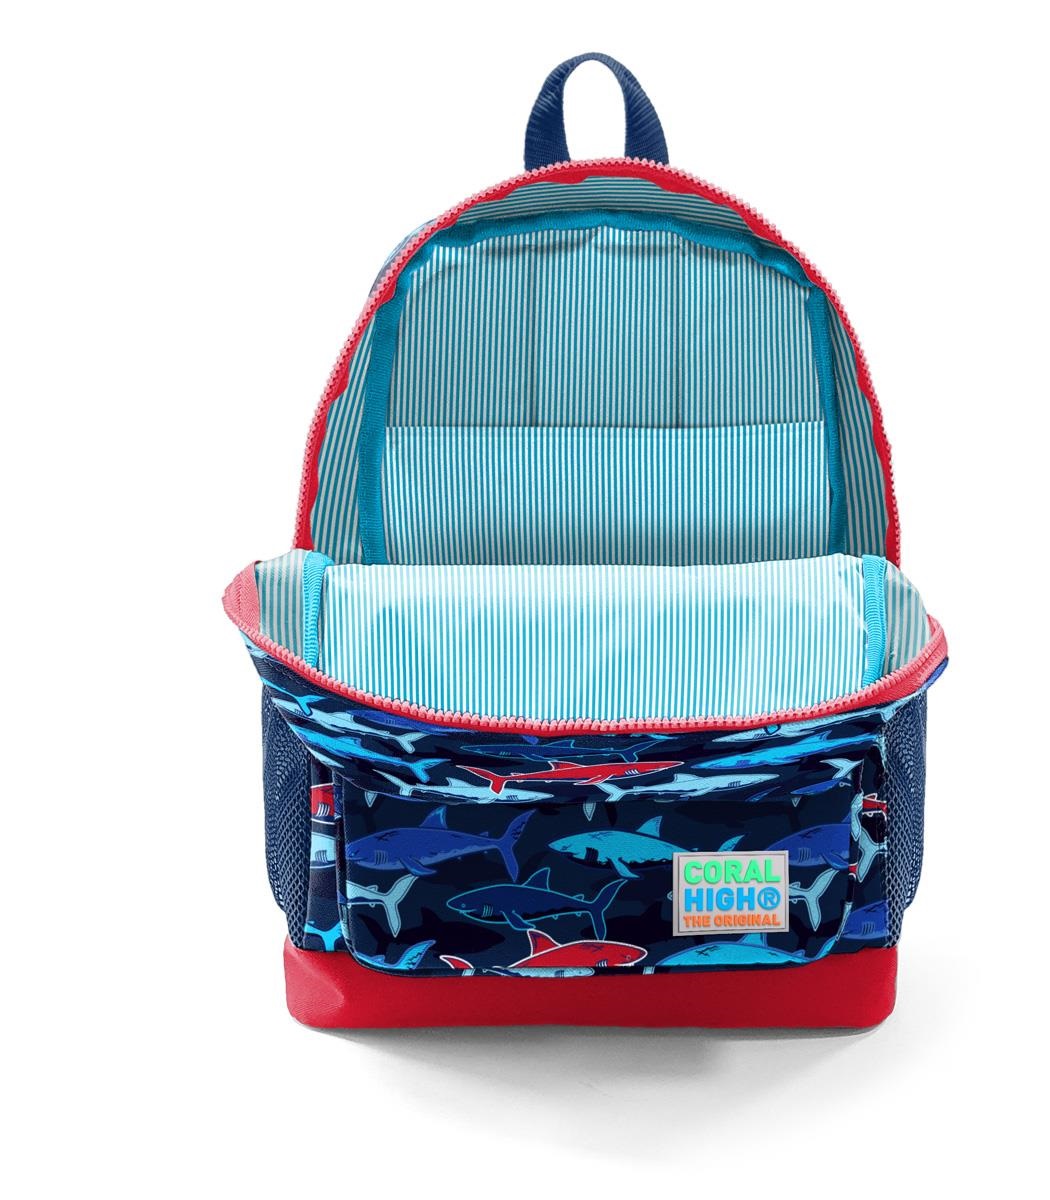 Coral High Kids Four Compartment School Backpack - Navy Red Shark Pattern